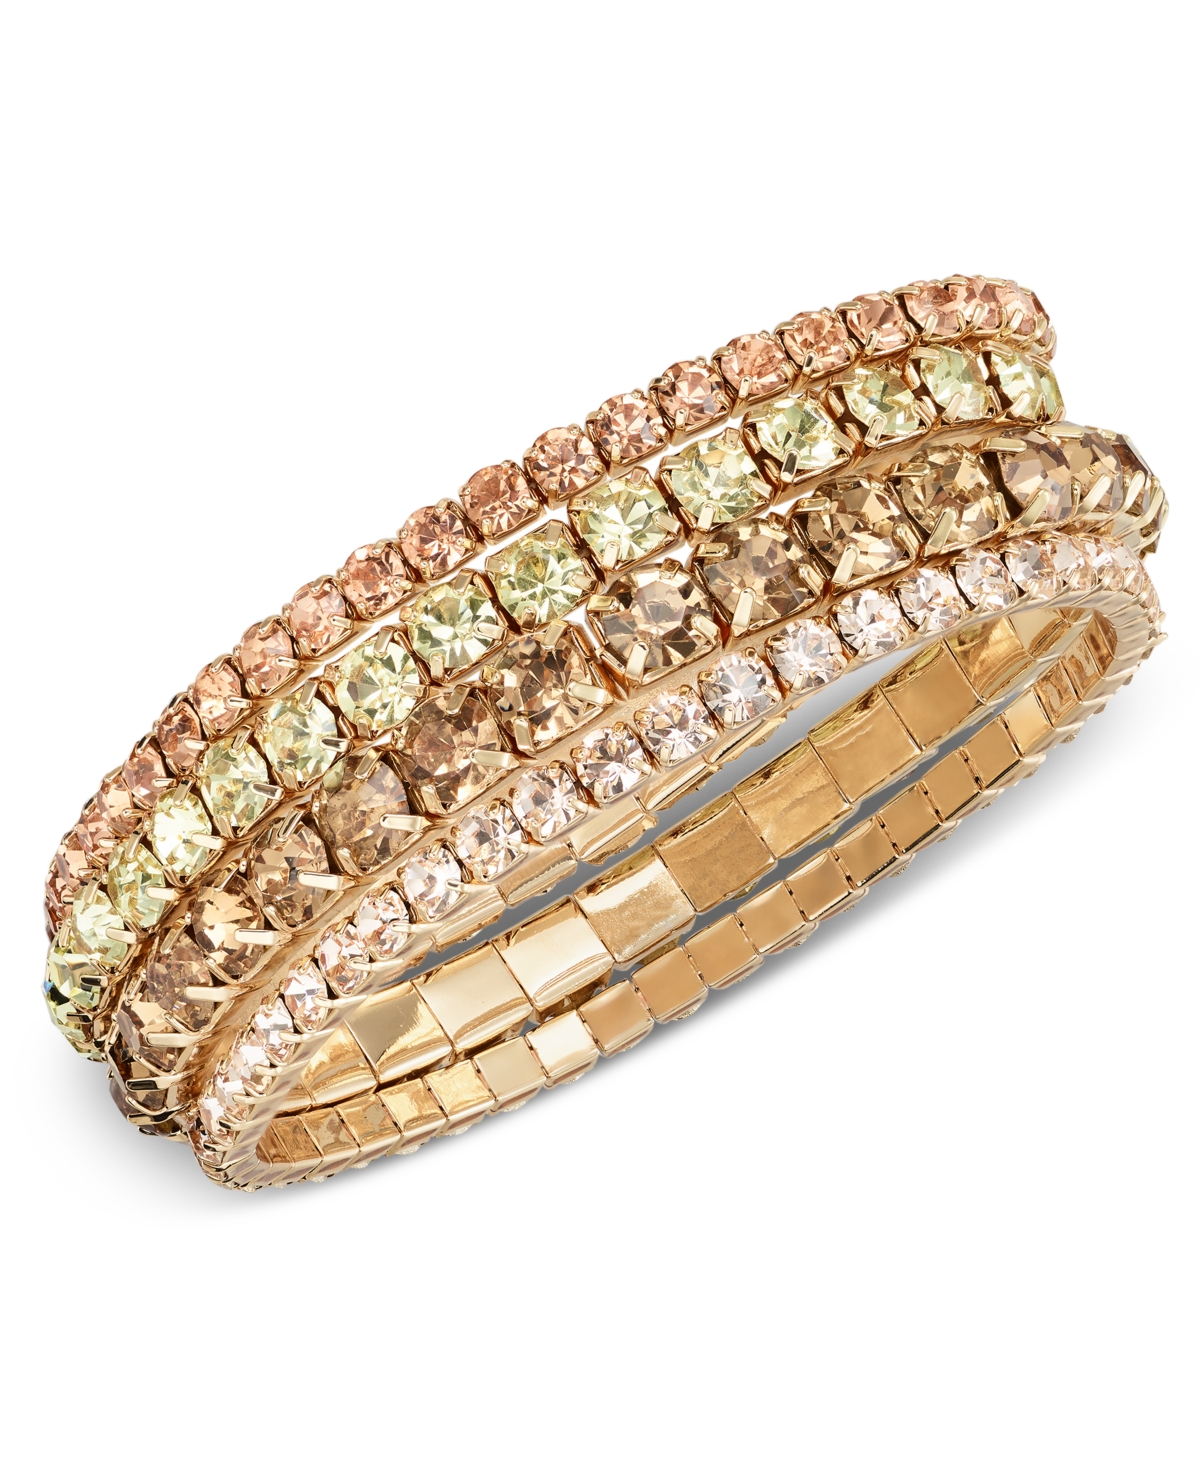 Gold-Tone 4-Pc. Set Color Crystal Stretch Bracelets, Created for Macy's - Neutral